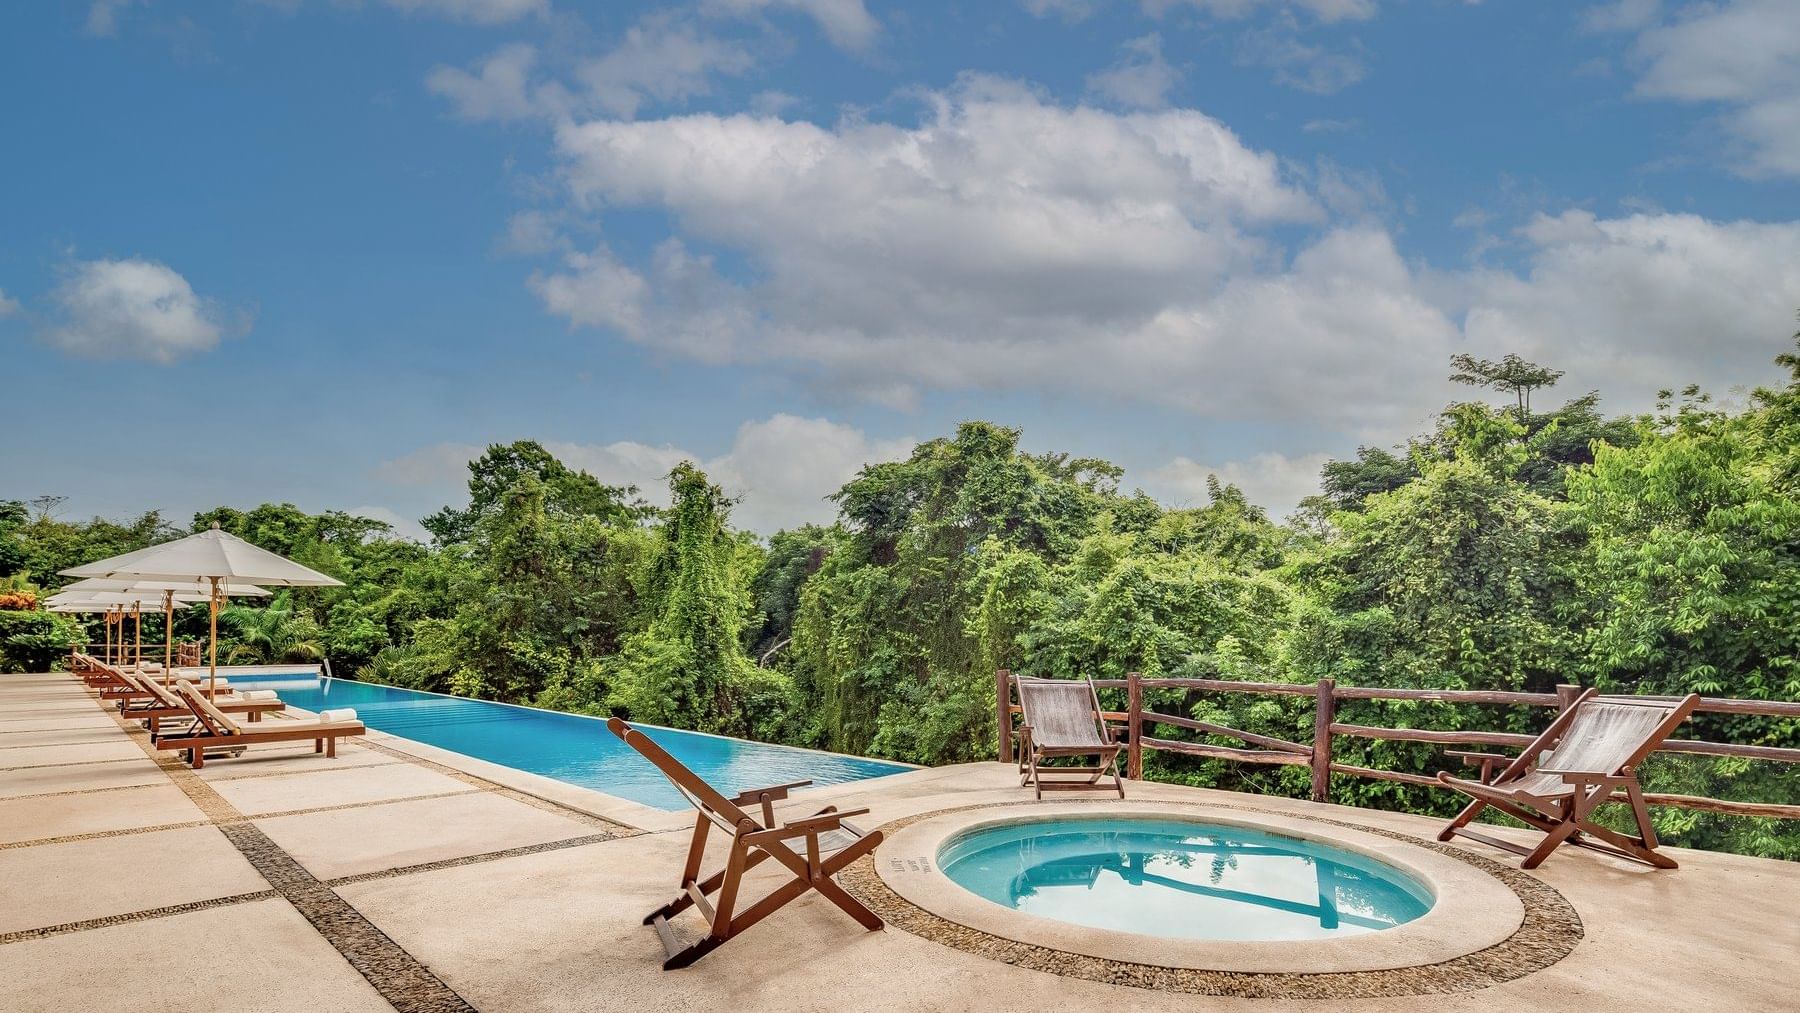 Jacuzzi by the outdoor swimming pool, overlooking the forest at The Explorean Kohunlich